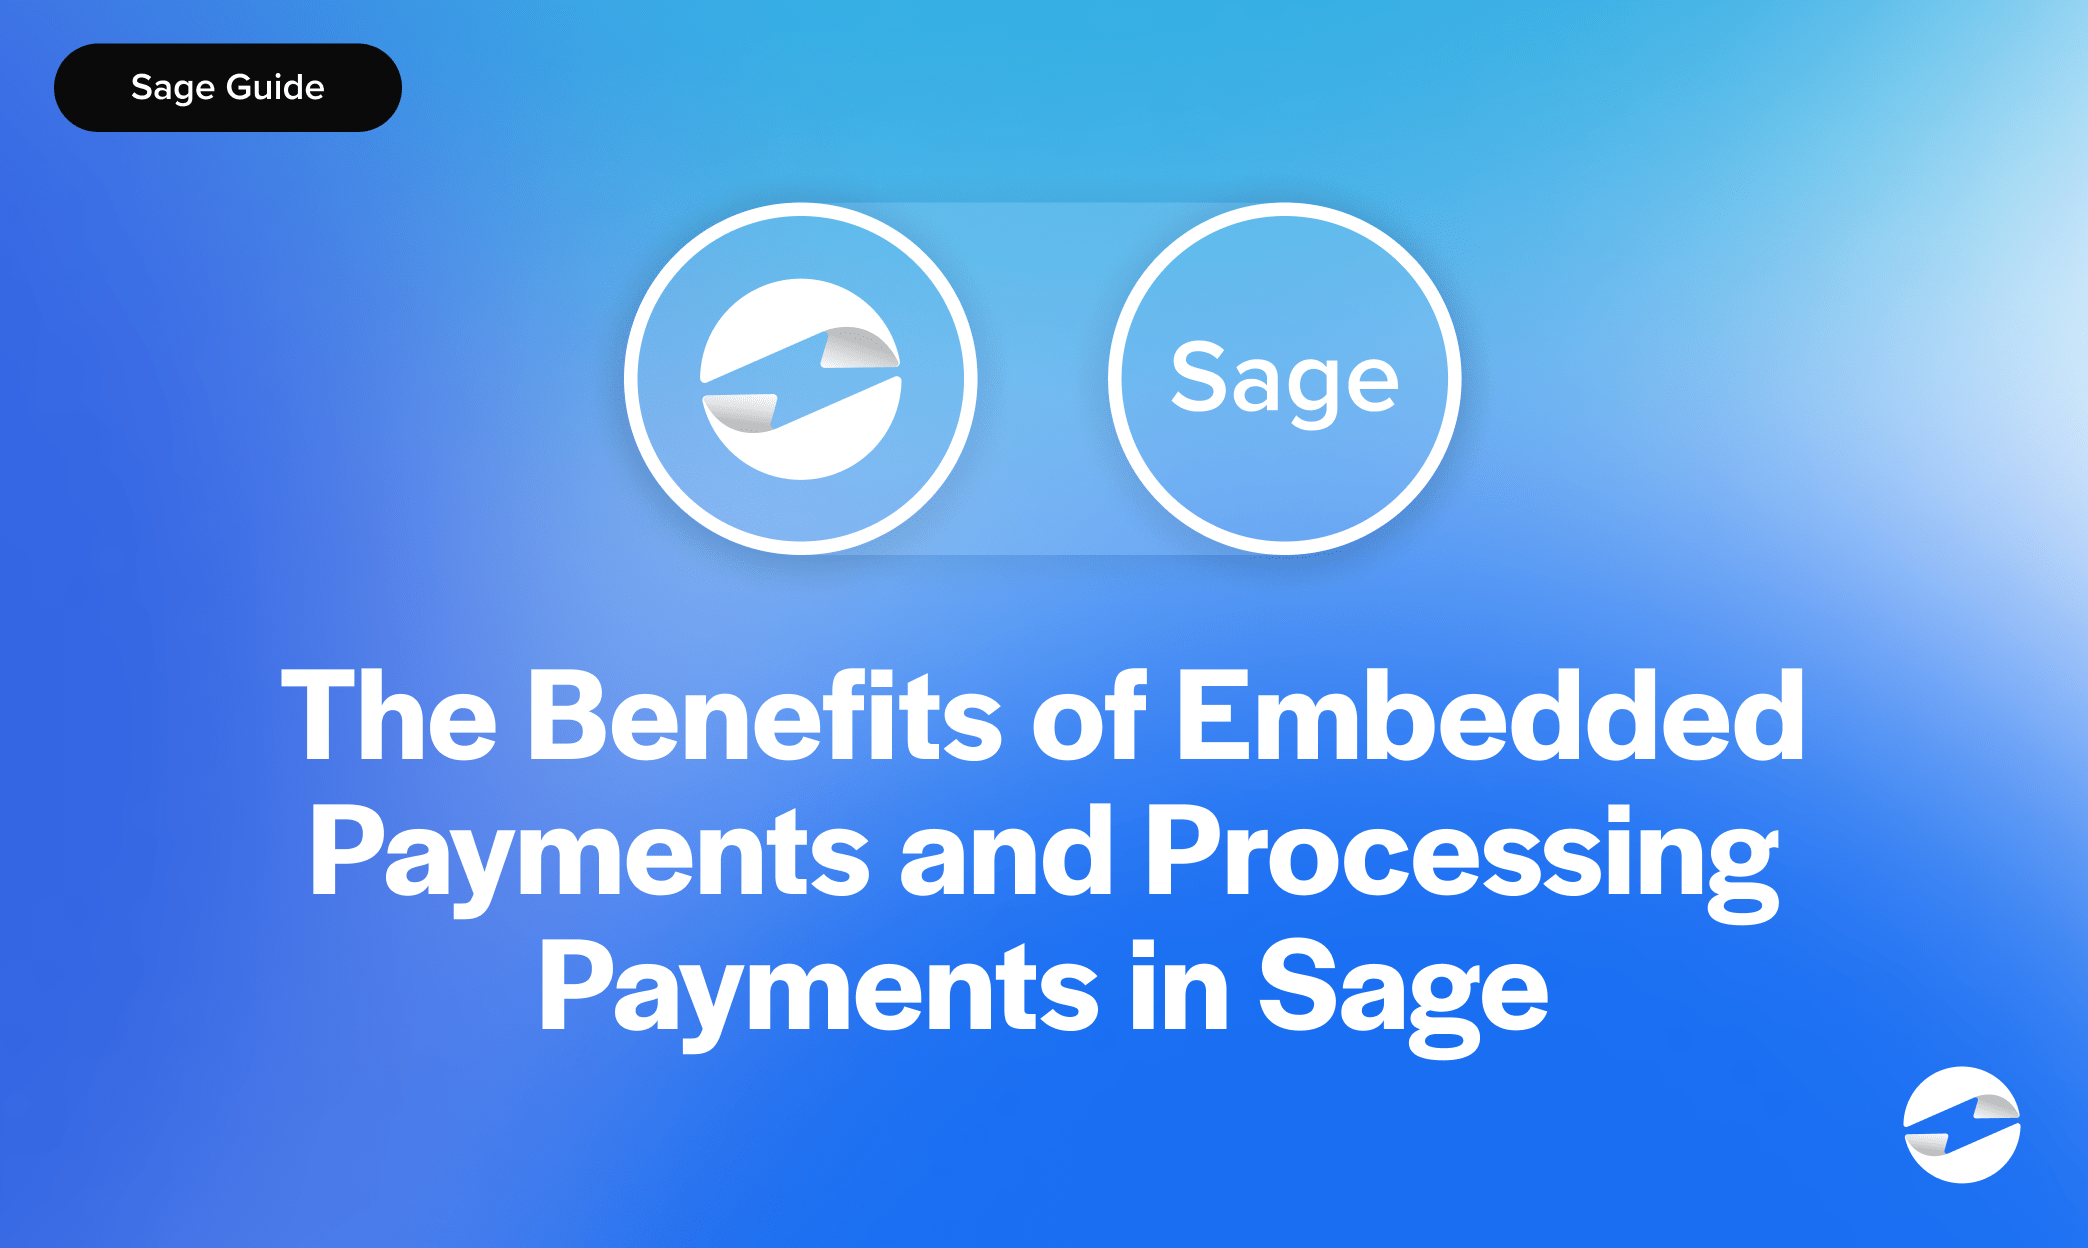 The Benefits of Embedded Payments and Processing Payments in Sage